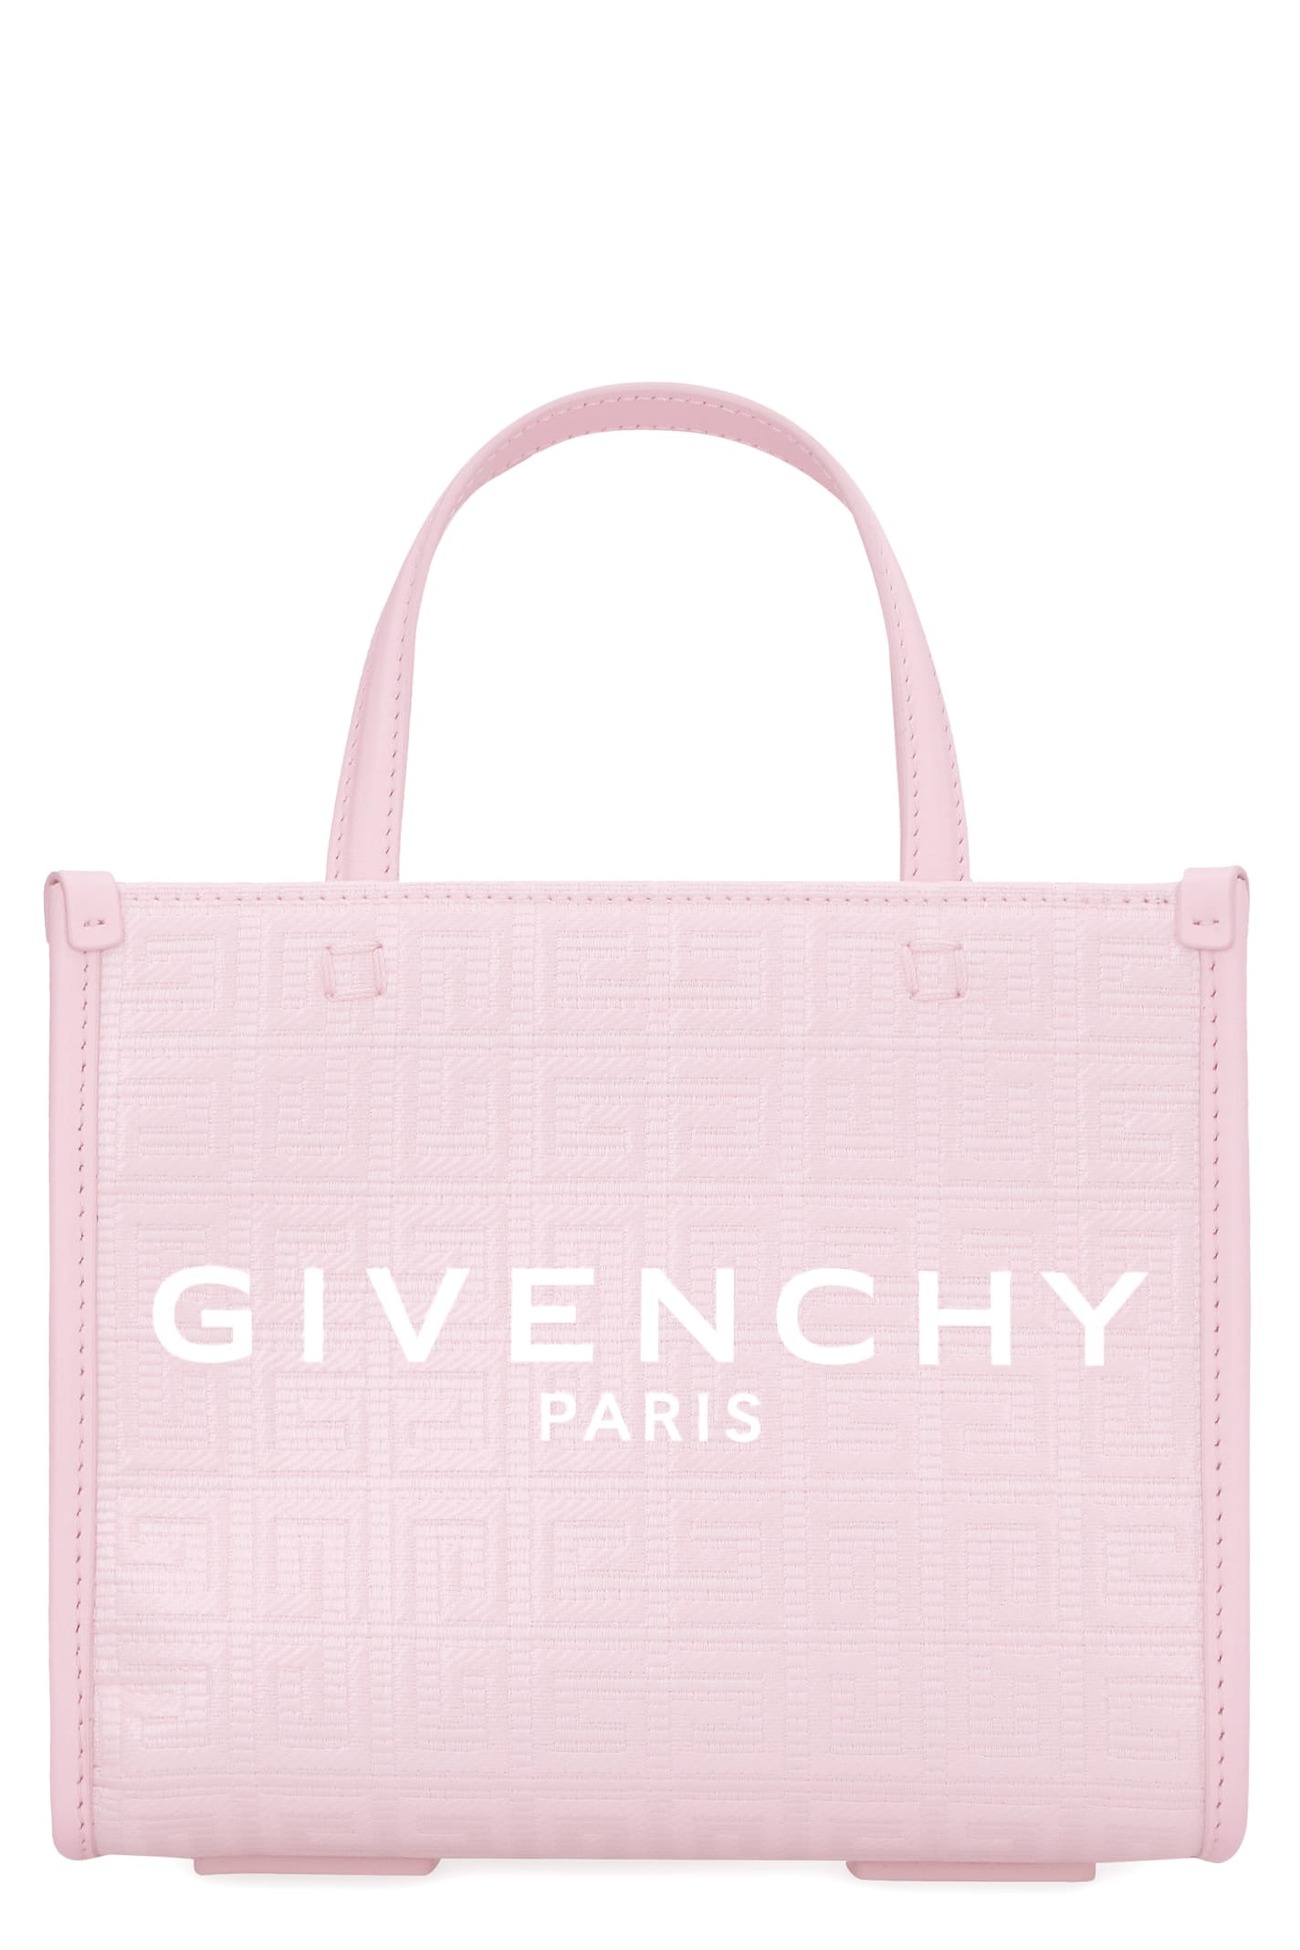 Givenchy G Canvas Mini Tote Bag in pink